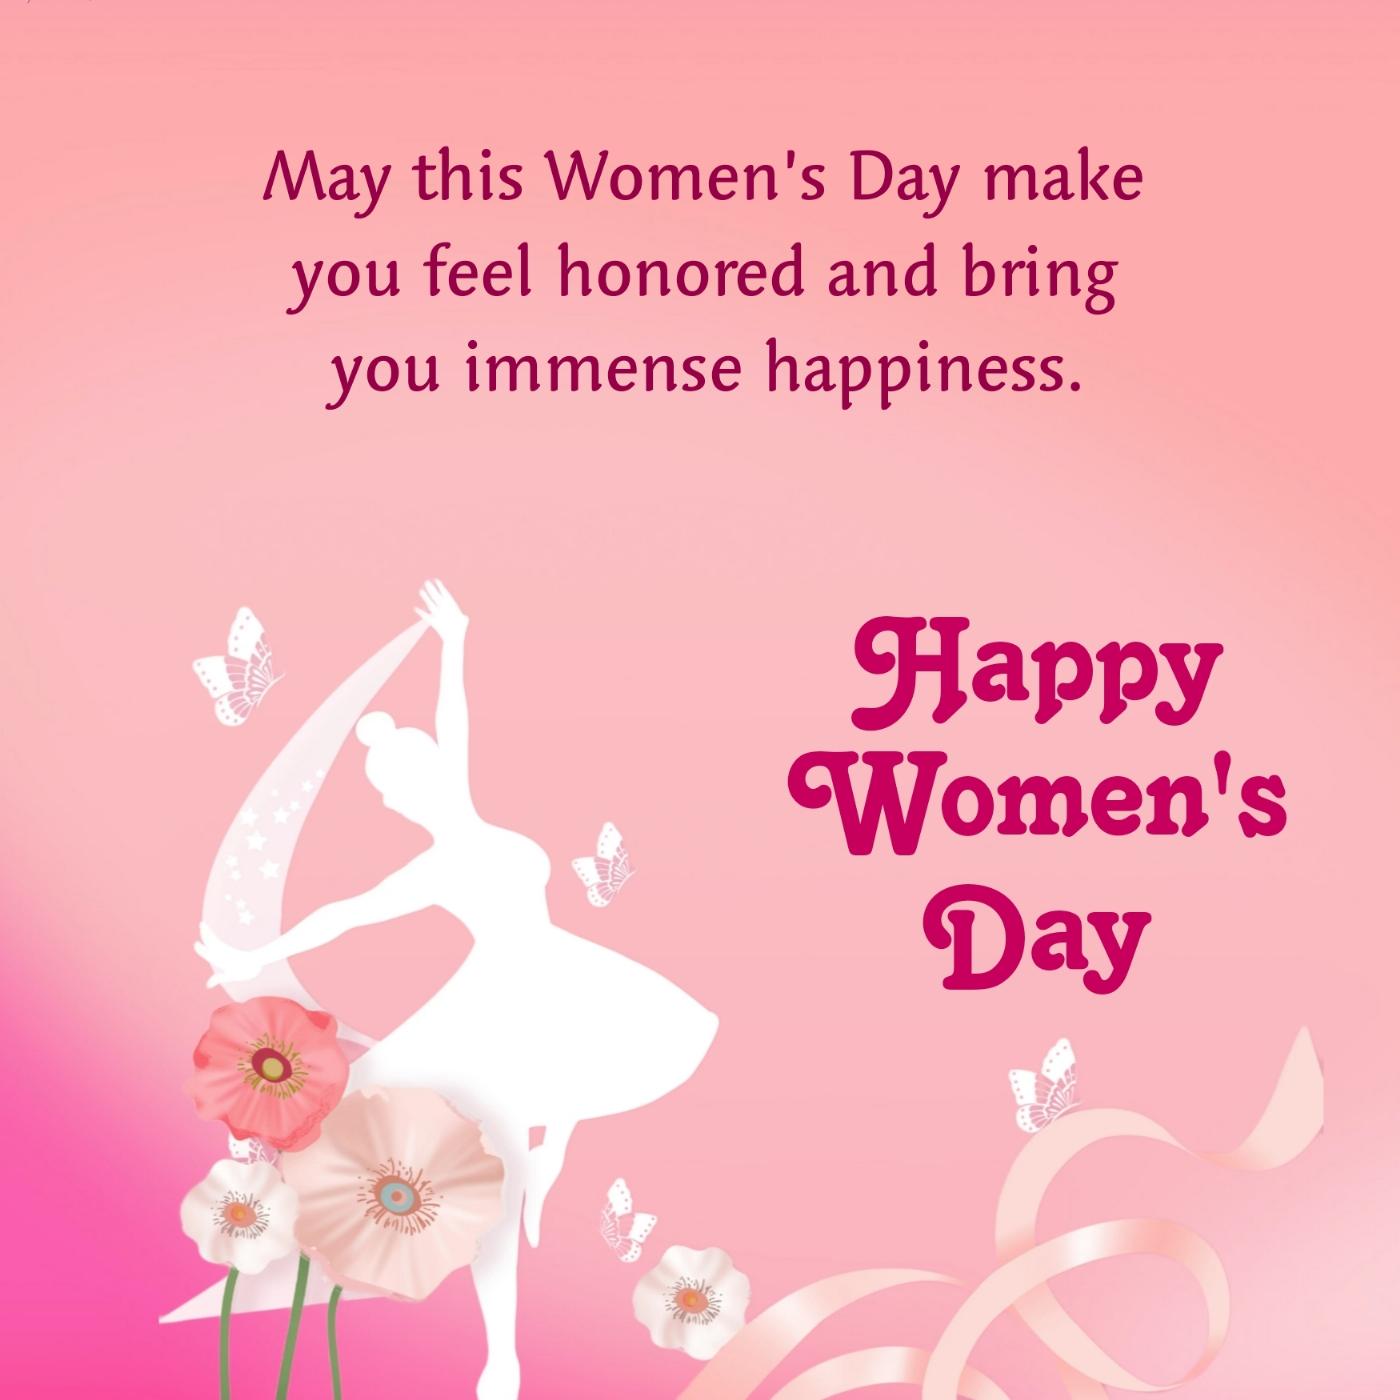 May this Womens Day make you feel honored